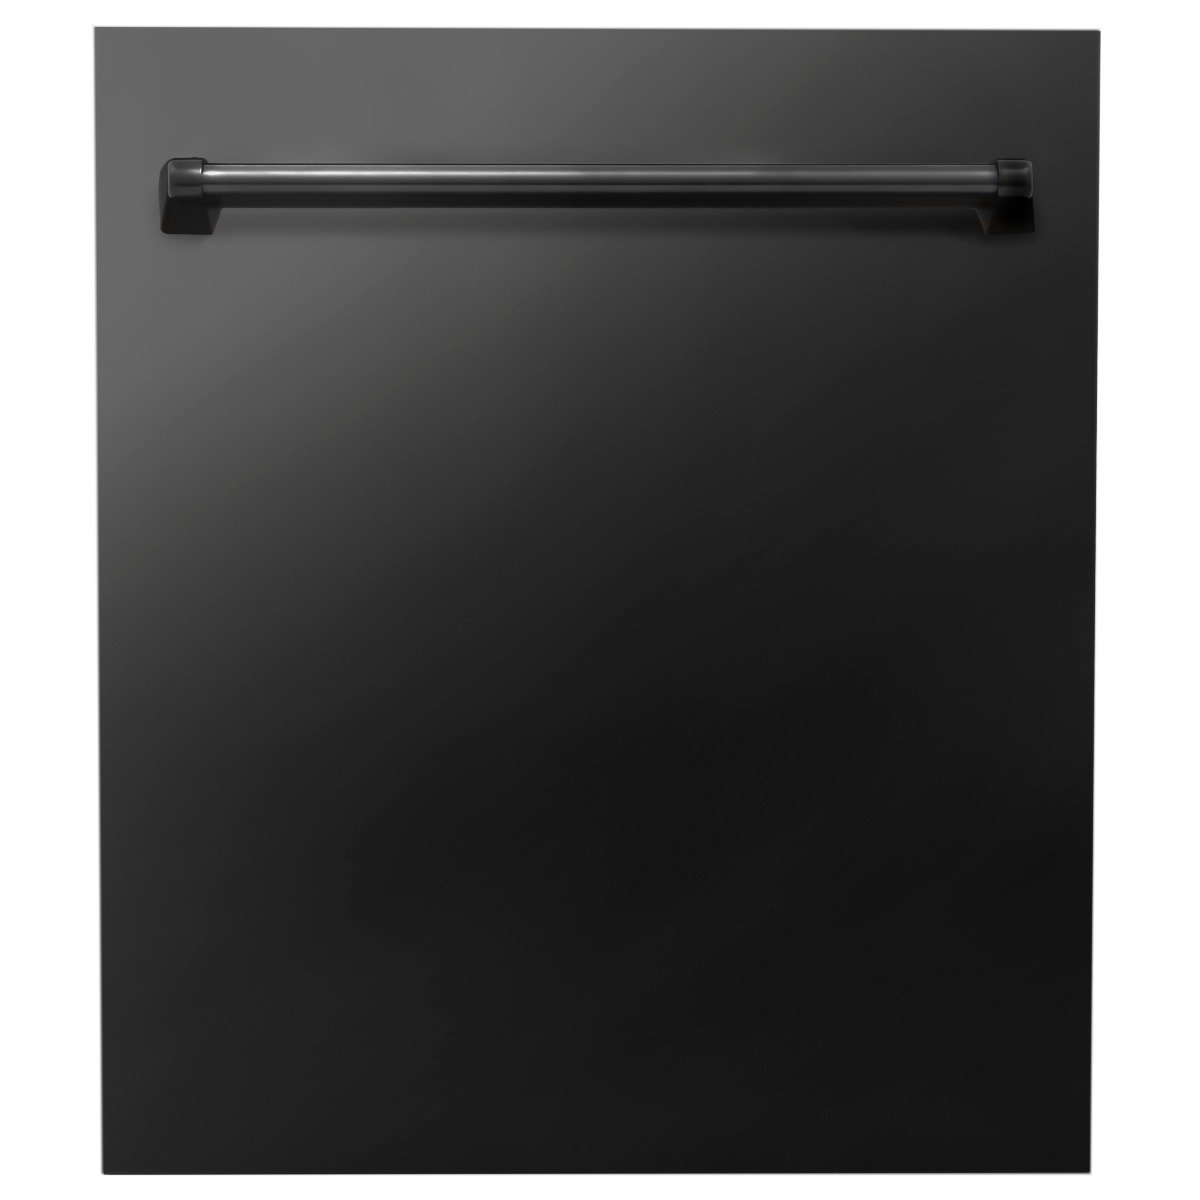 ZLINE 48" Kitchen Package with Black Stainless Steel Dual Fuel Range, Range Hood, Microwave Drawer and Dishwasher